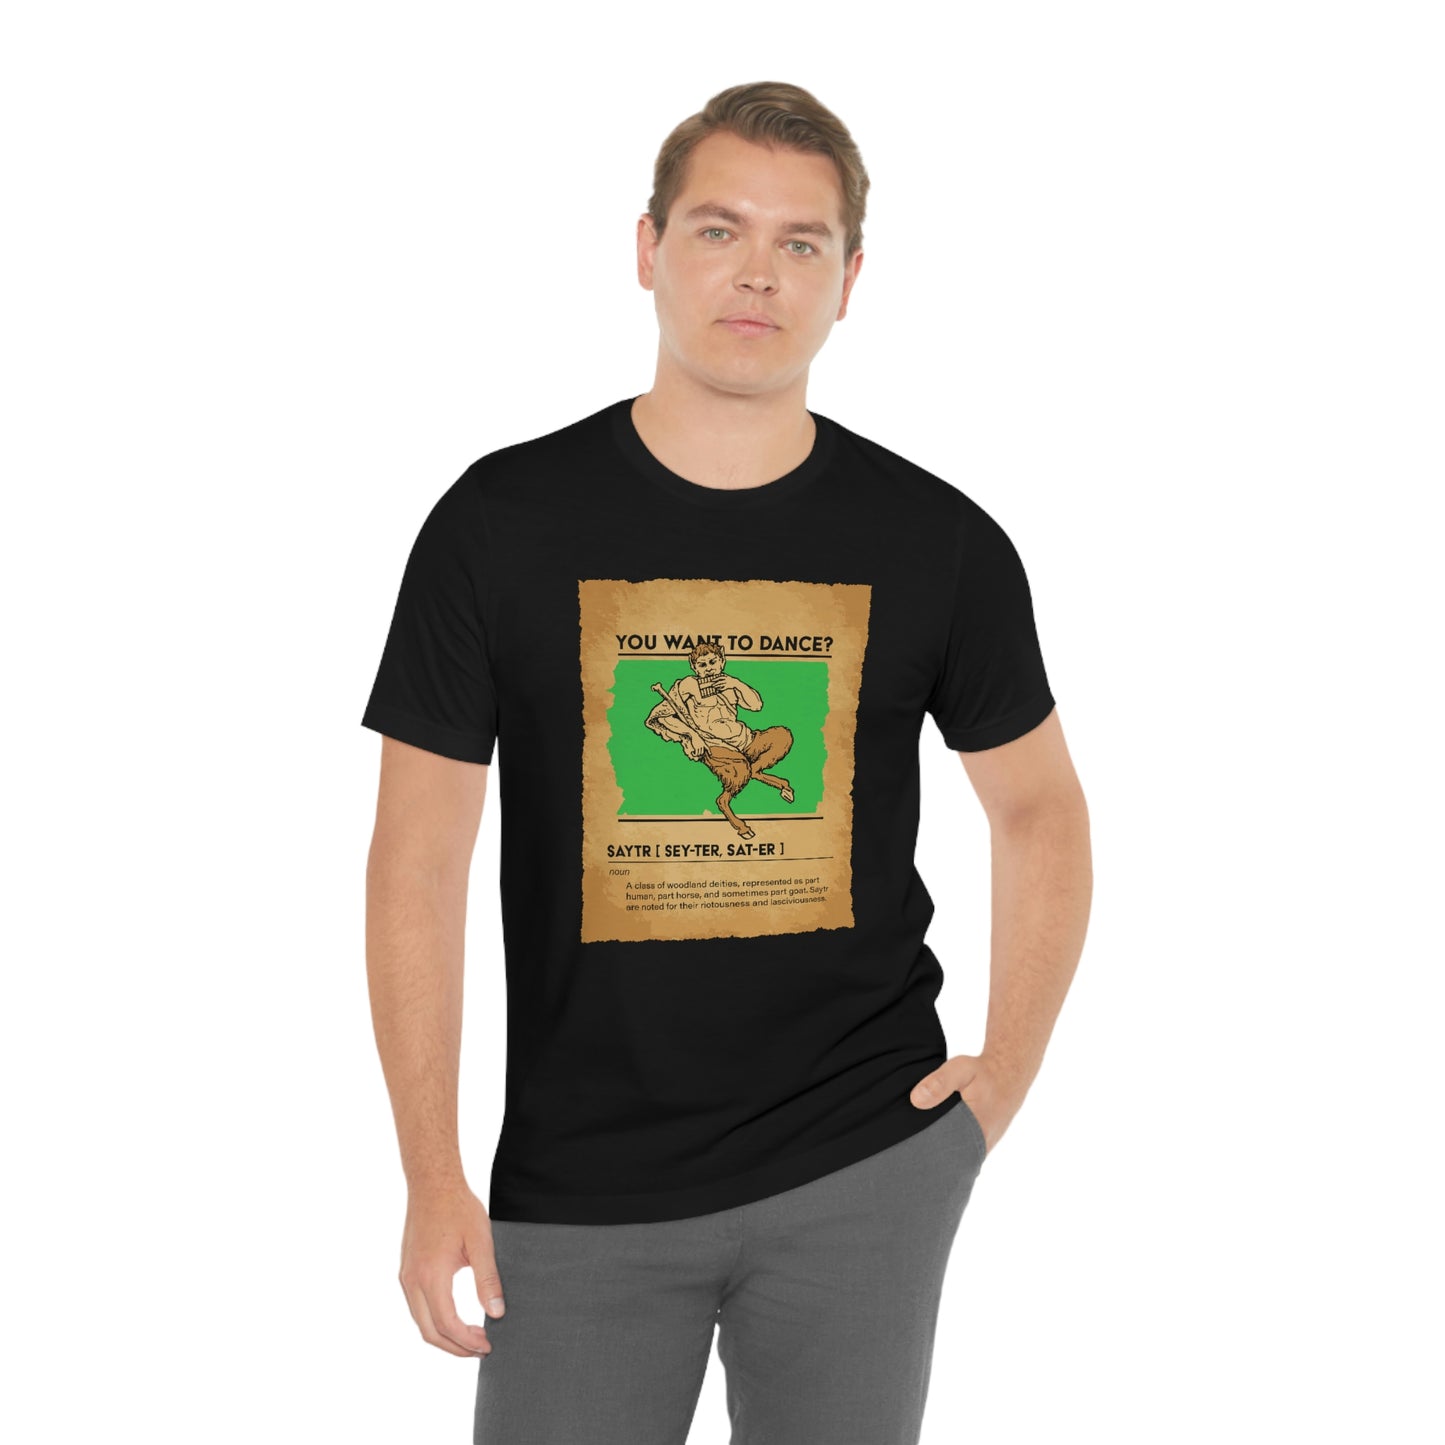 You Want to Dance? (Dungeon Edition) - Men's T-Shirt